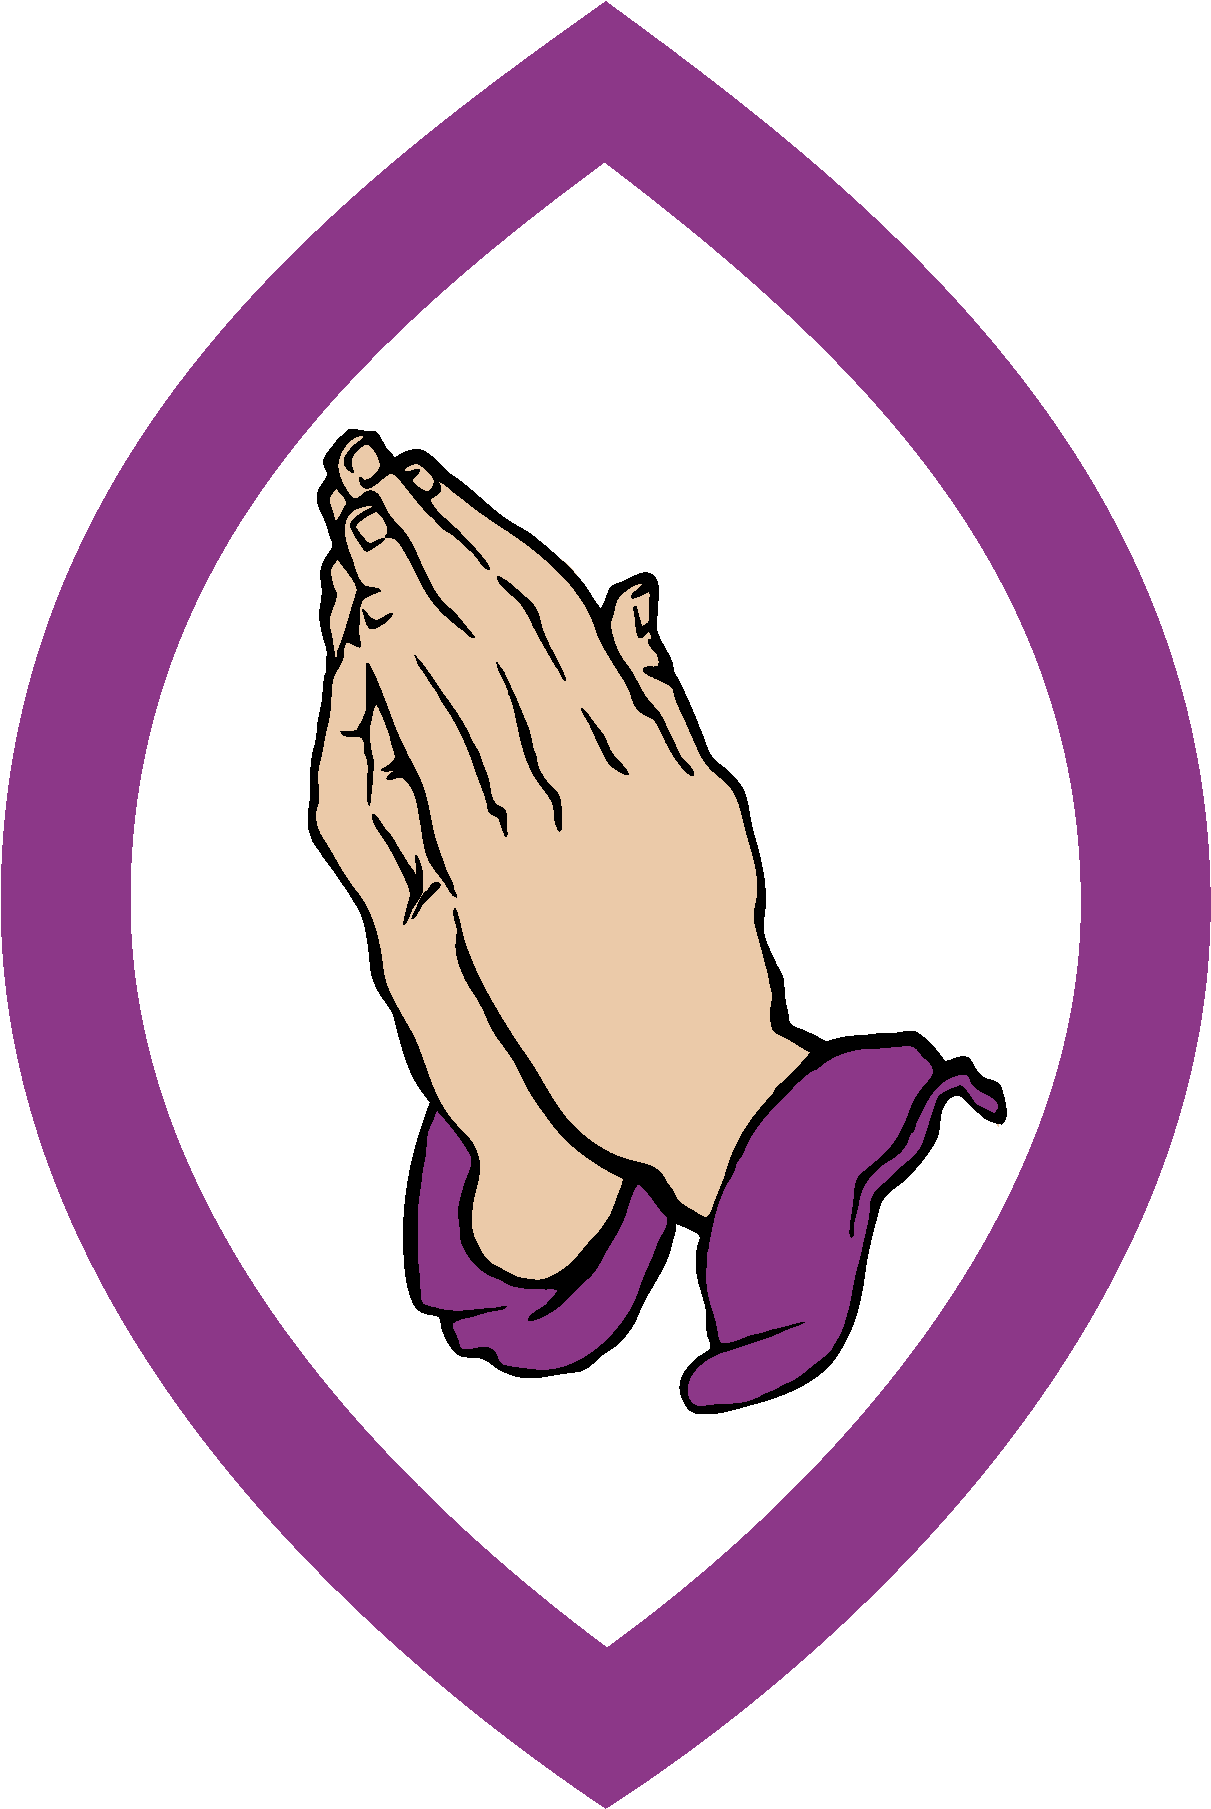 Upcoming Events - Prayer (1313x1949)